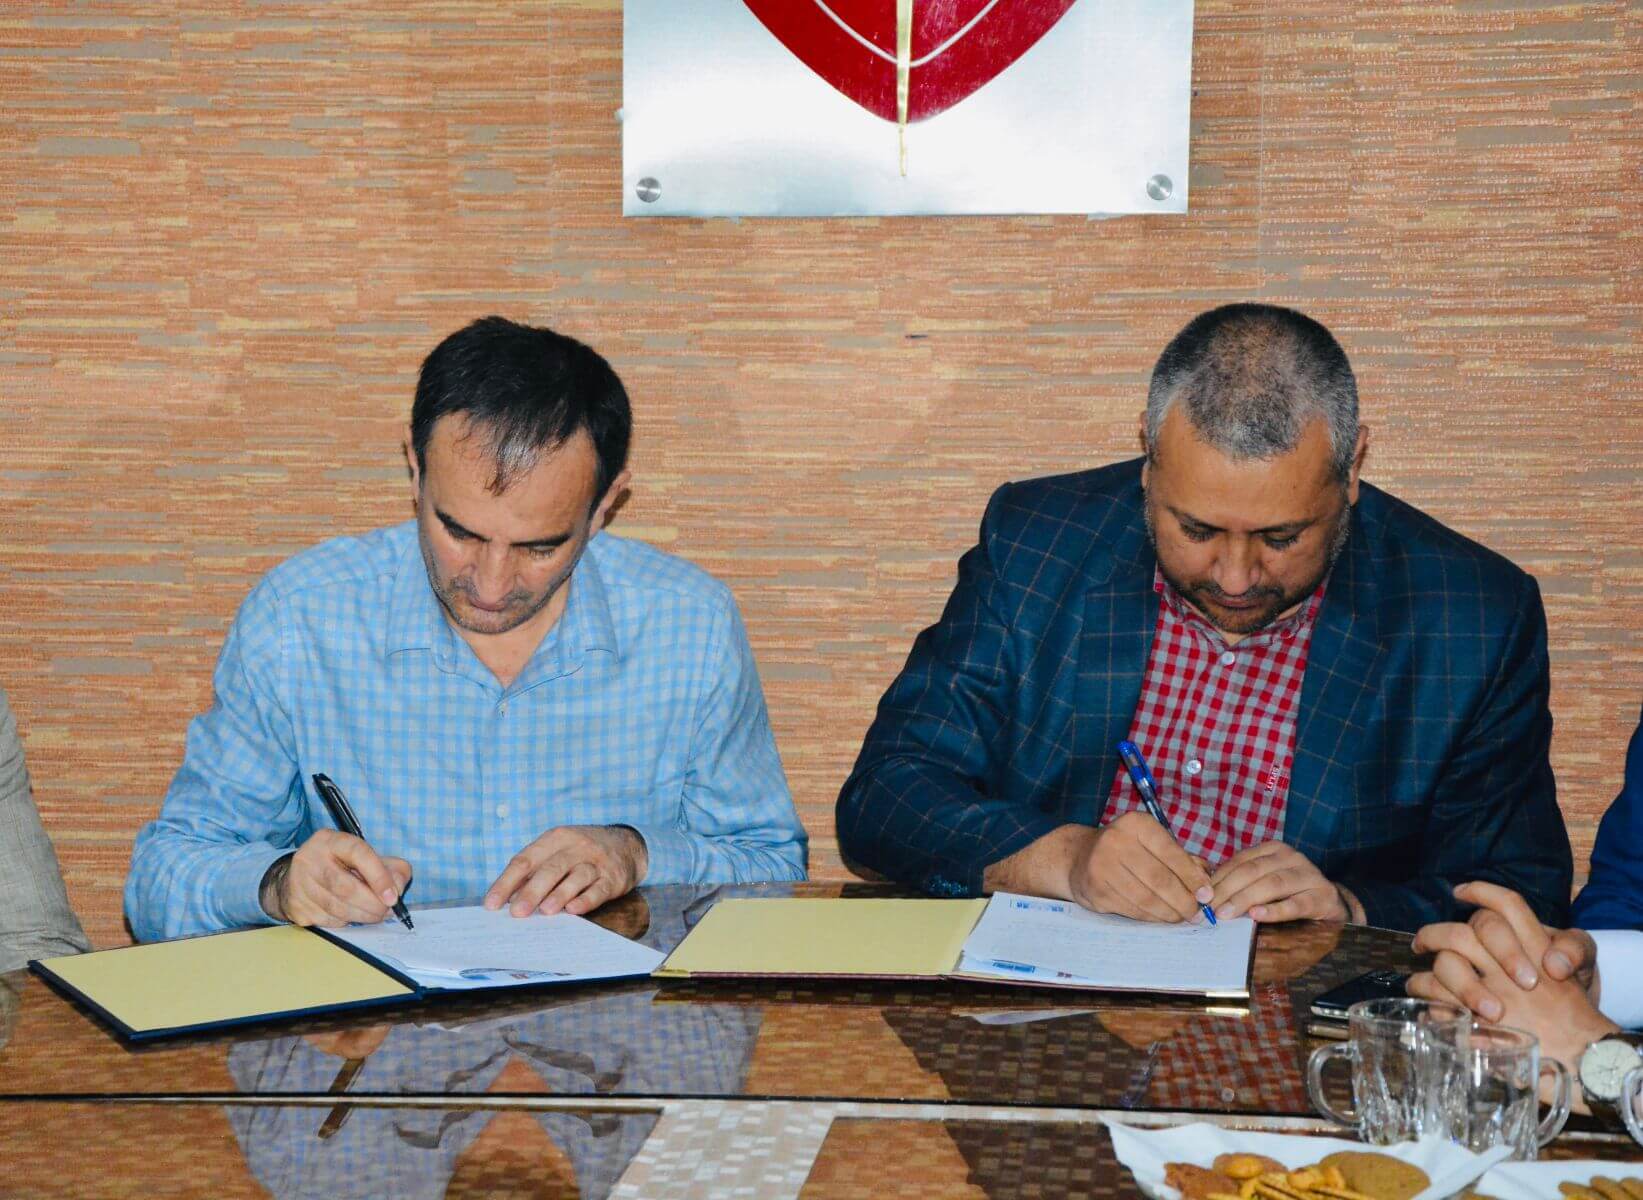 From the left Prof. Khaliluraman Sarwary, Director of AELSO Academy and Mr. Sayed Mustafa Sayedy the Vice President of Rana University During the signing of MoU.